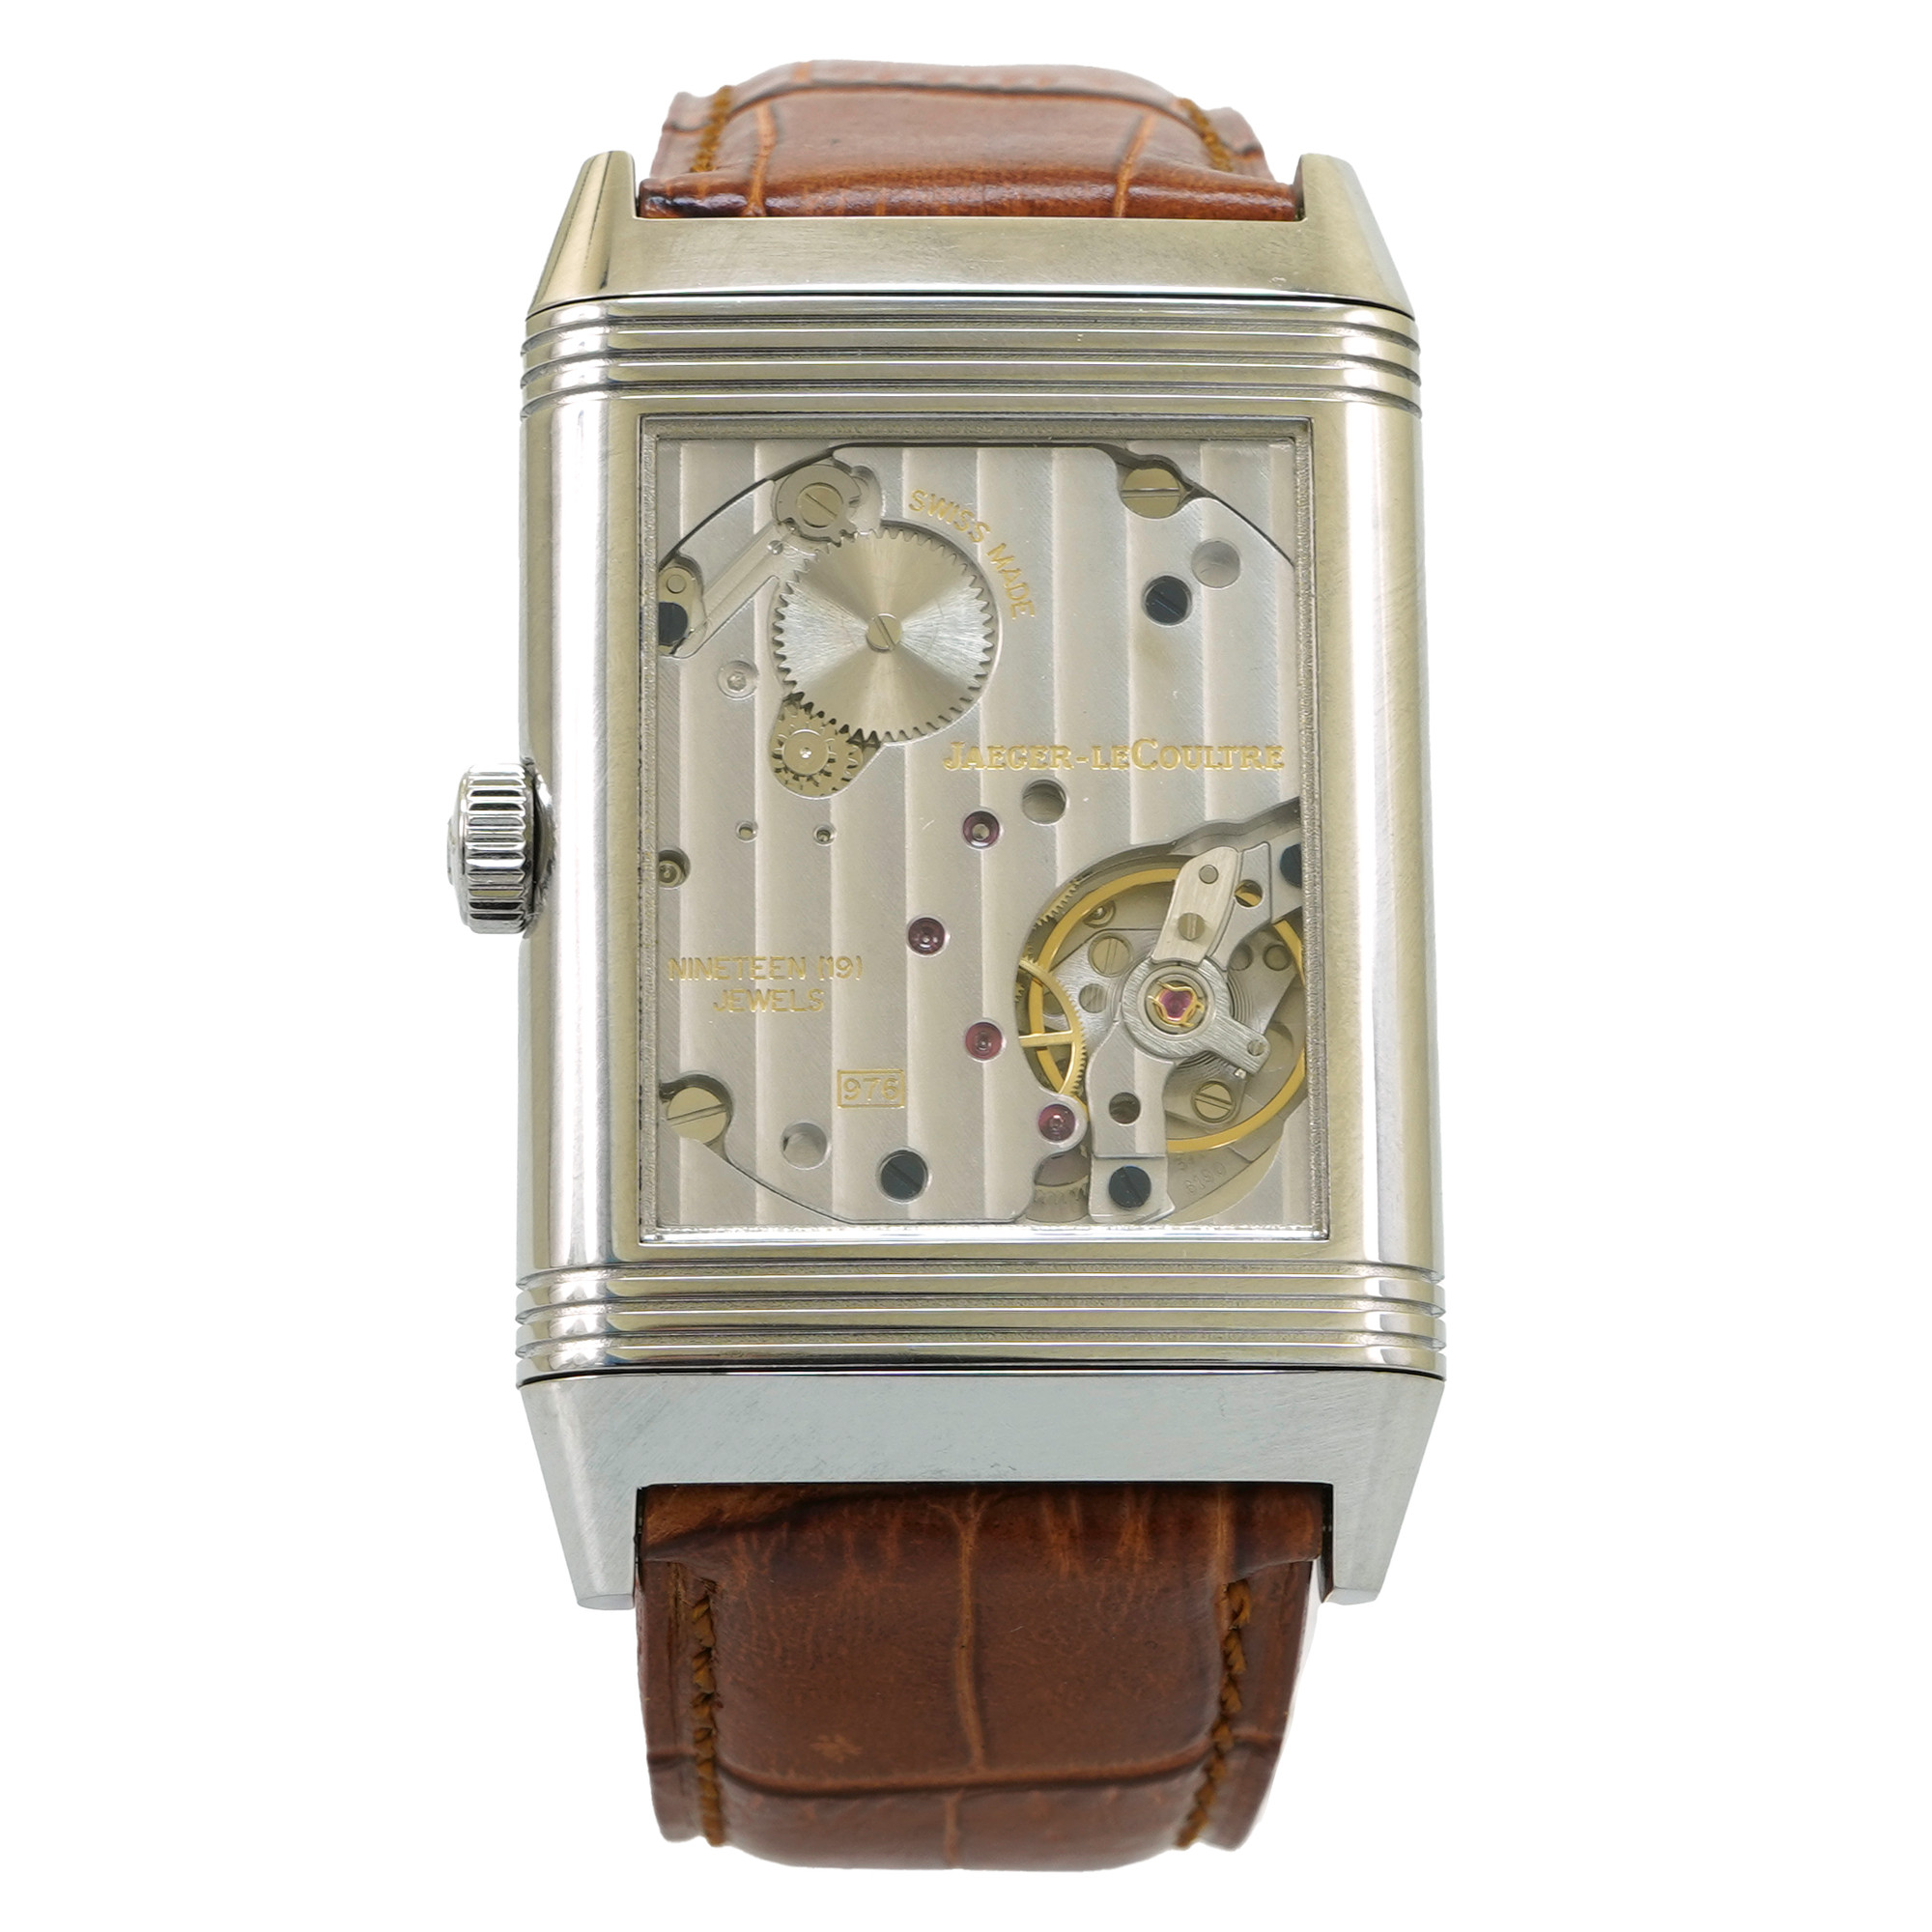 Jaeger LeCoultre Reverso Grande Steel 273.8.04 - Inventory 5480 *ON HOLD*